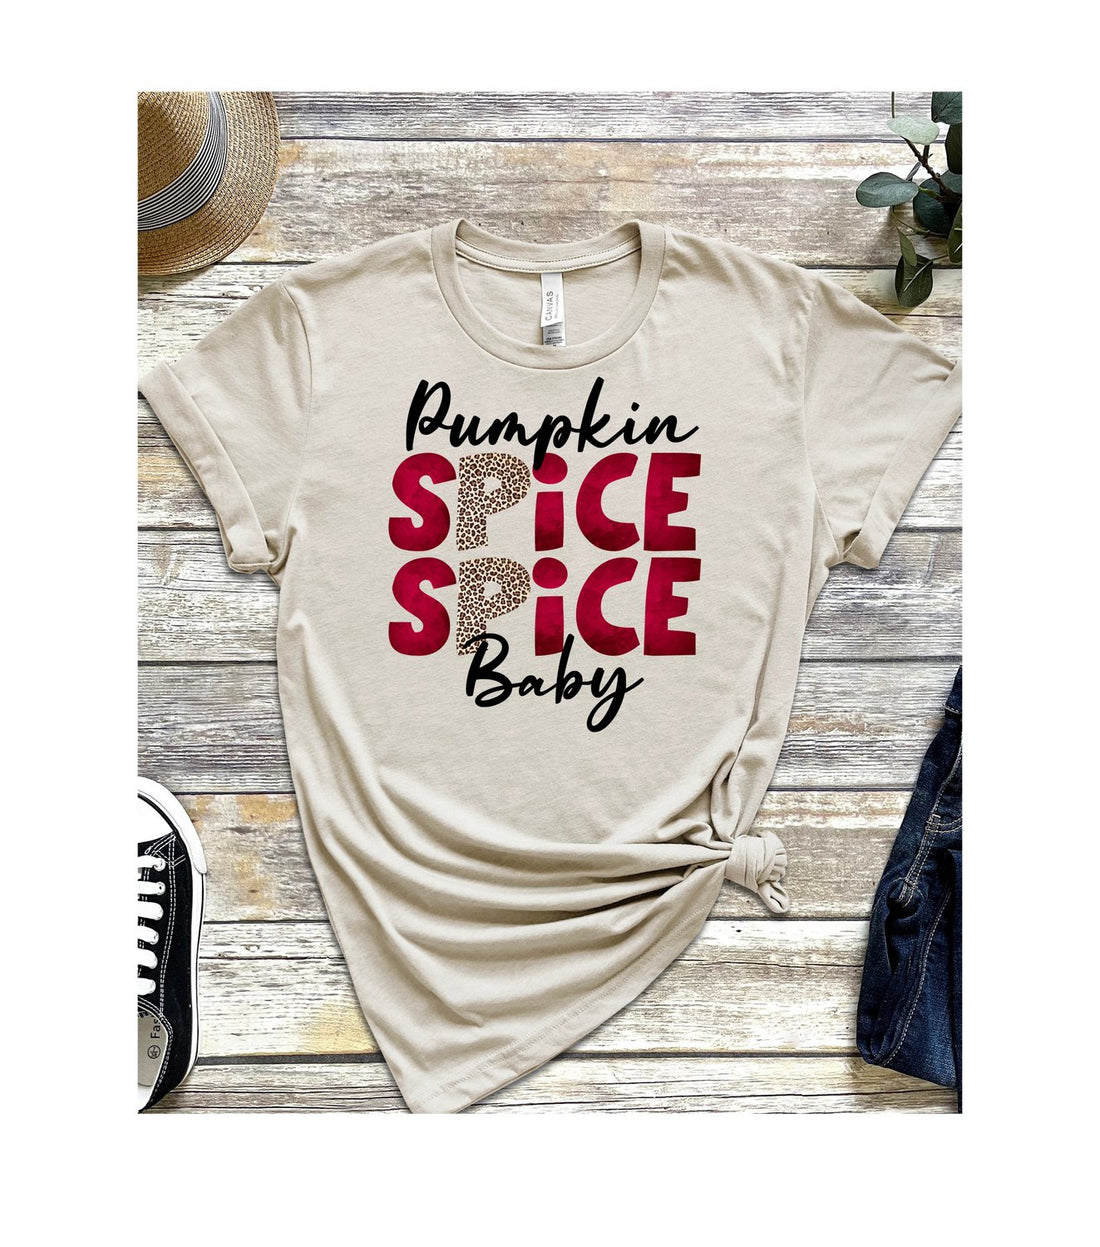 Spice Baby - T-Shirts - Positively Sassy - Spice Baby